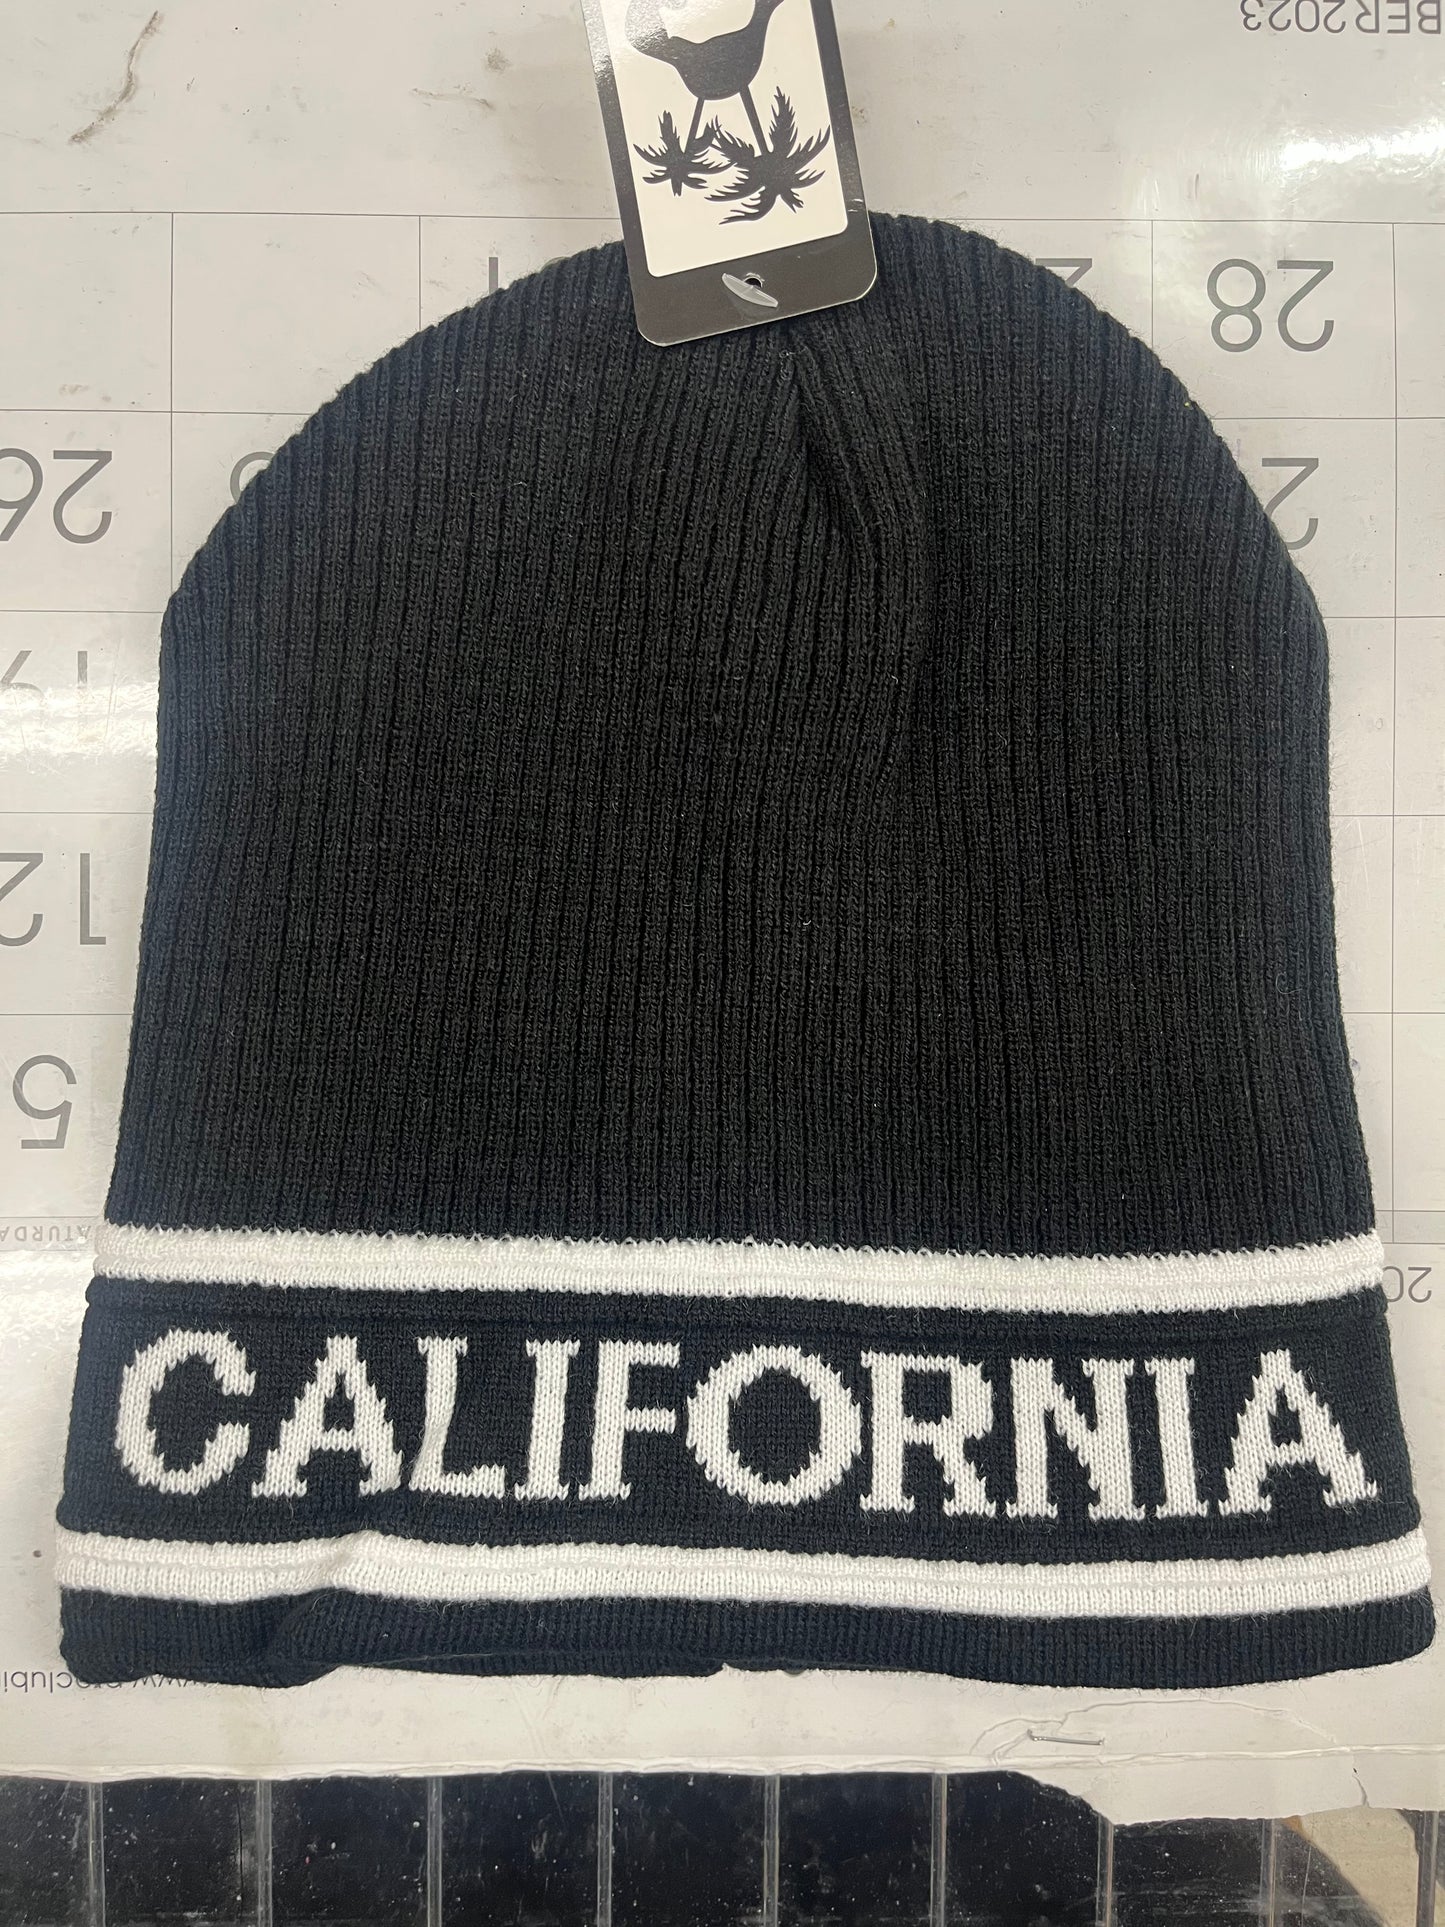 Beanies with Logos